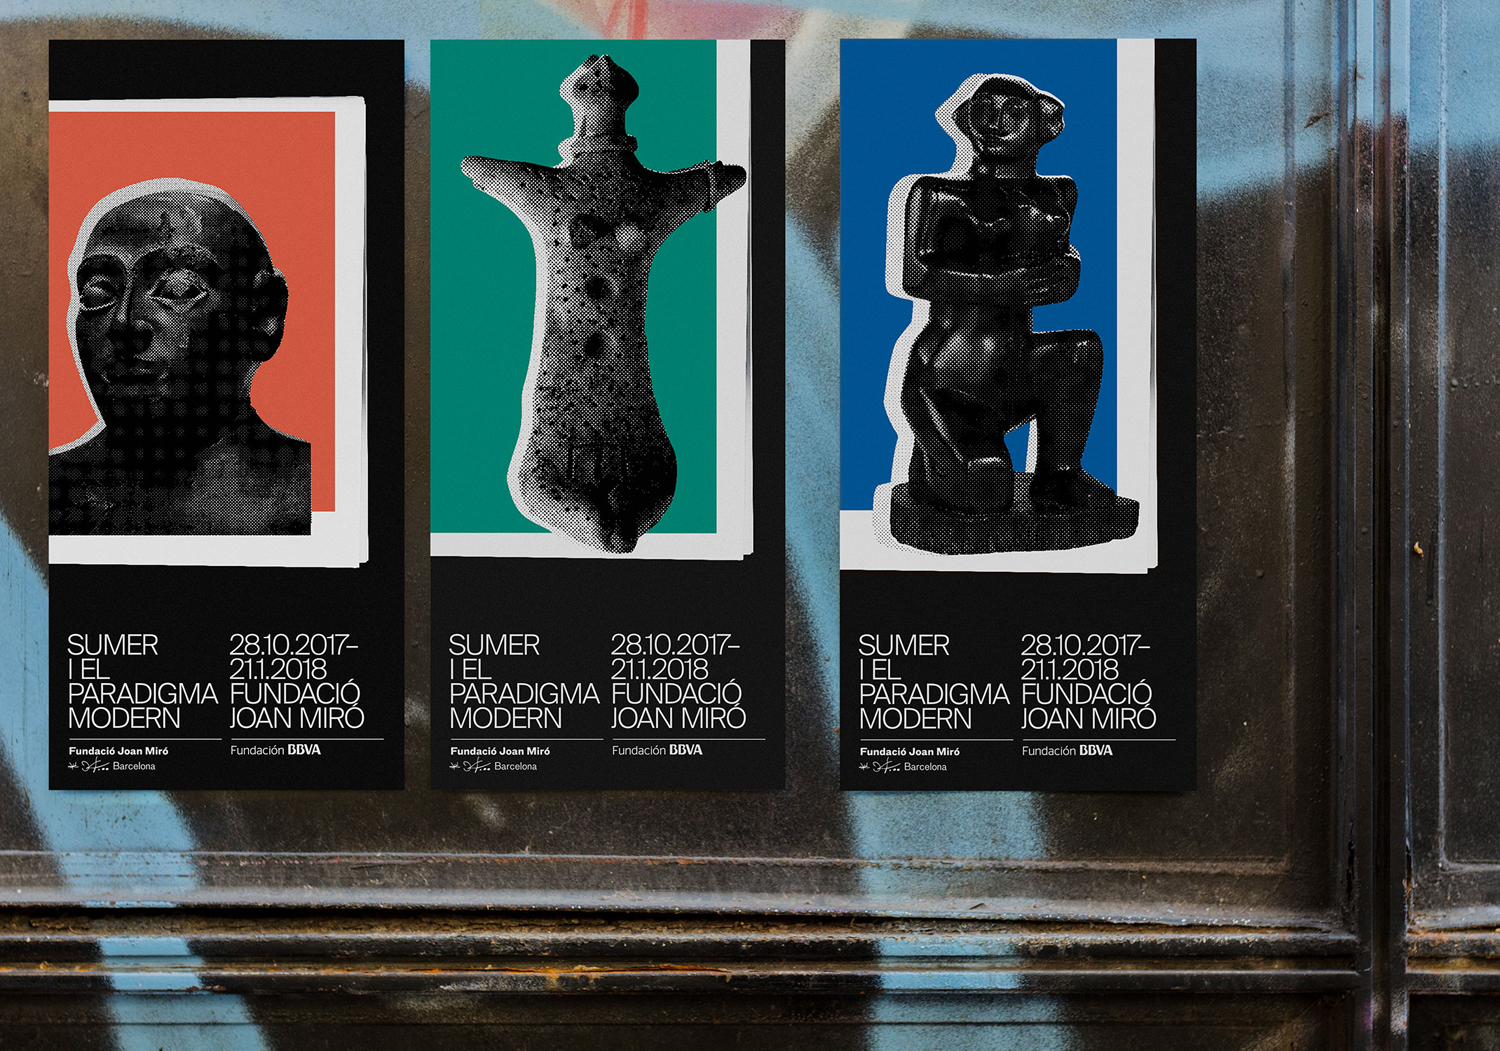 Graphic identity and posters by Clase bcn for exhibition Sumer And The Modern Paradigm